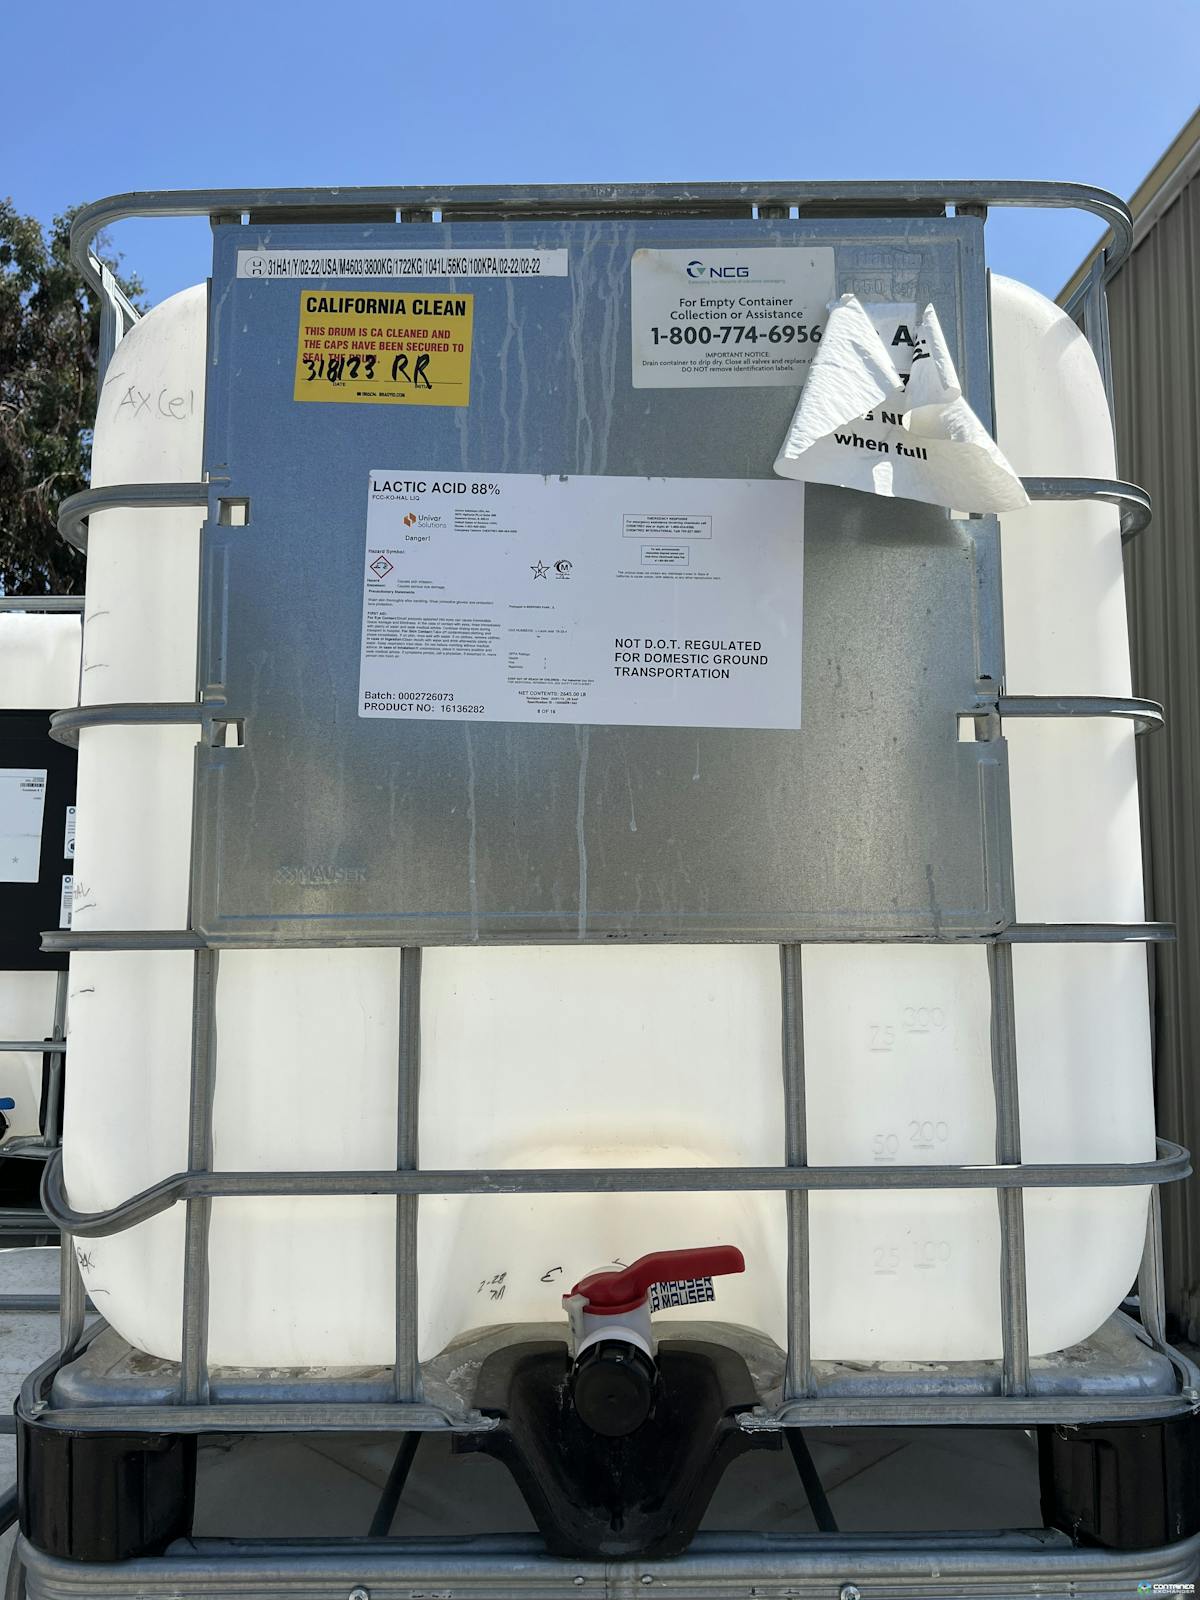 IBC Totes For Sale: USED 275 Gallon IBC Totes Previous Food Grade and Triple Washed CALIFORNIA CLEAN TAGGED In California - image 2